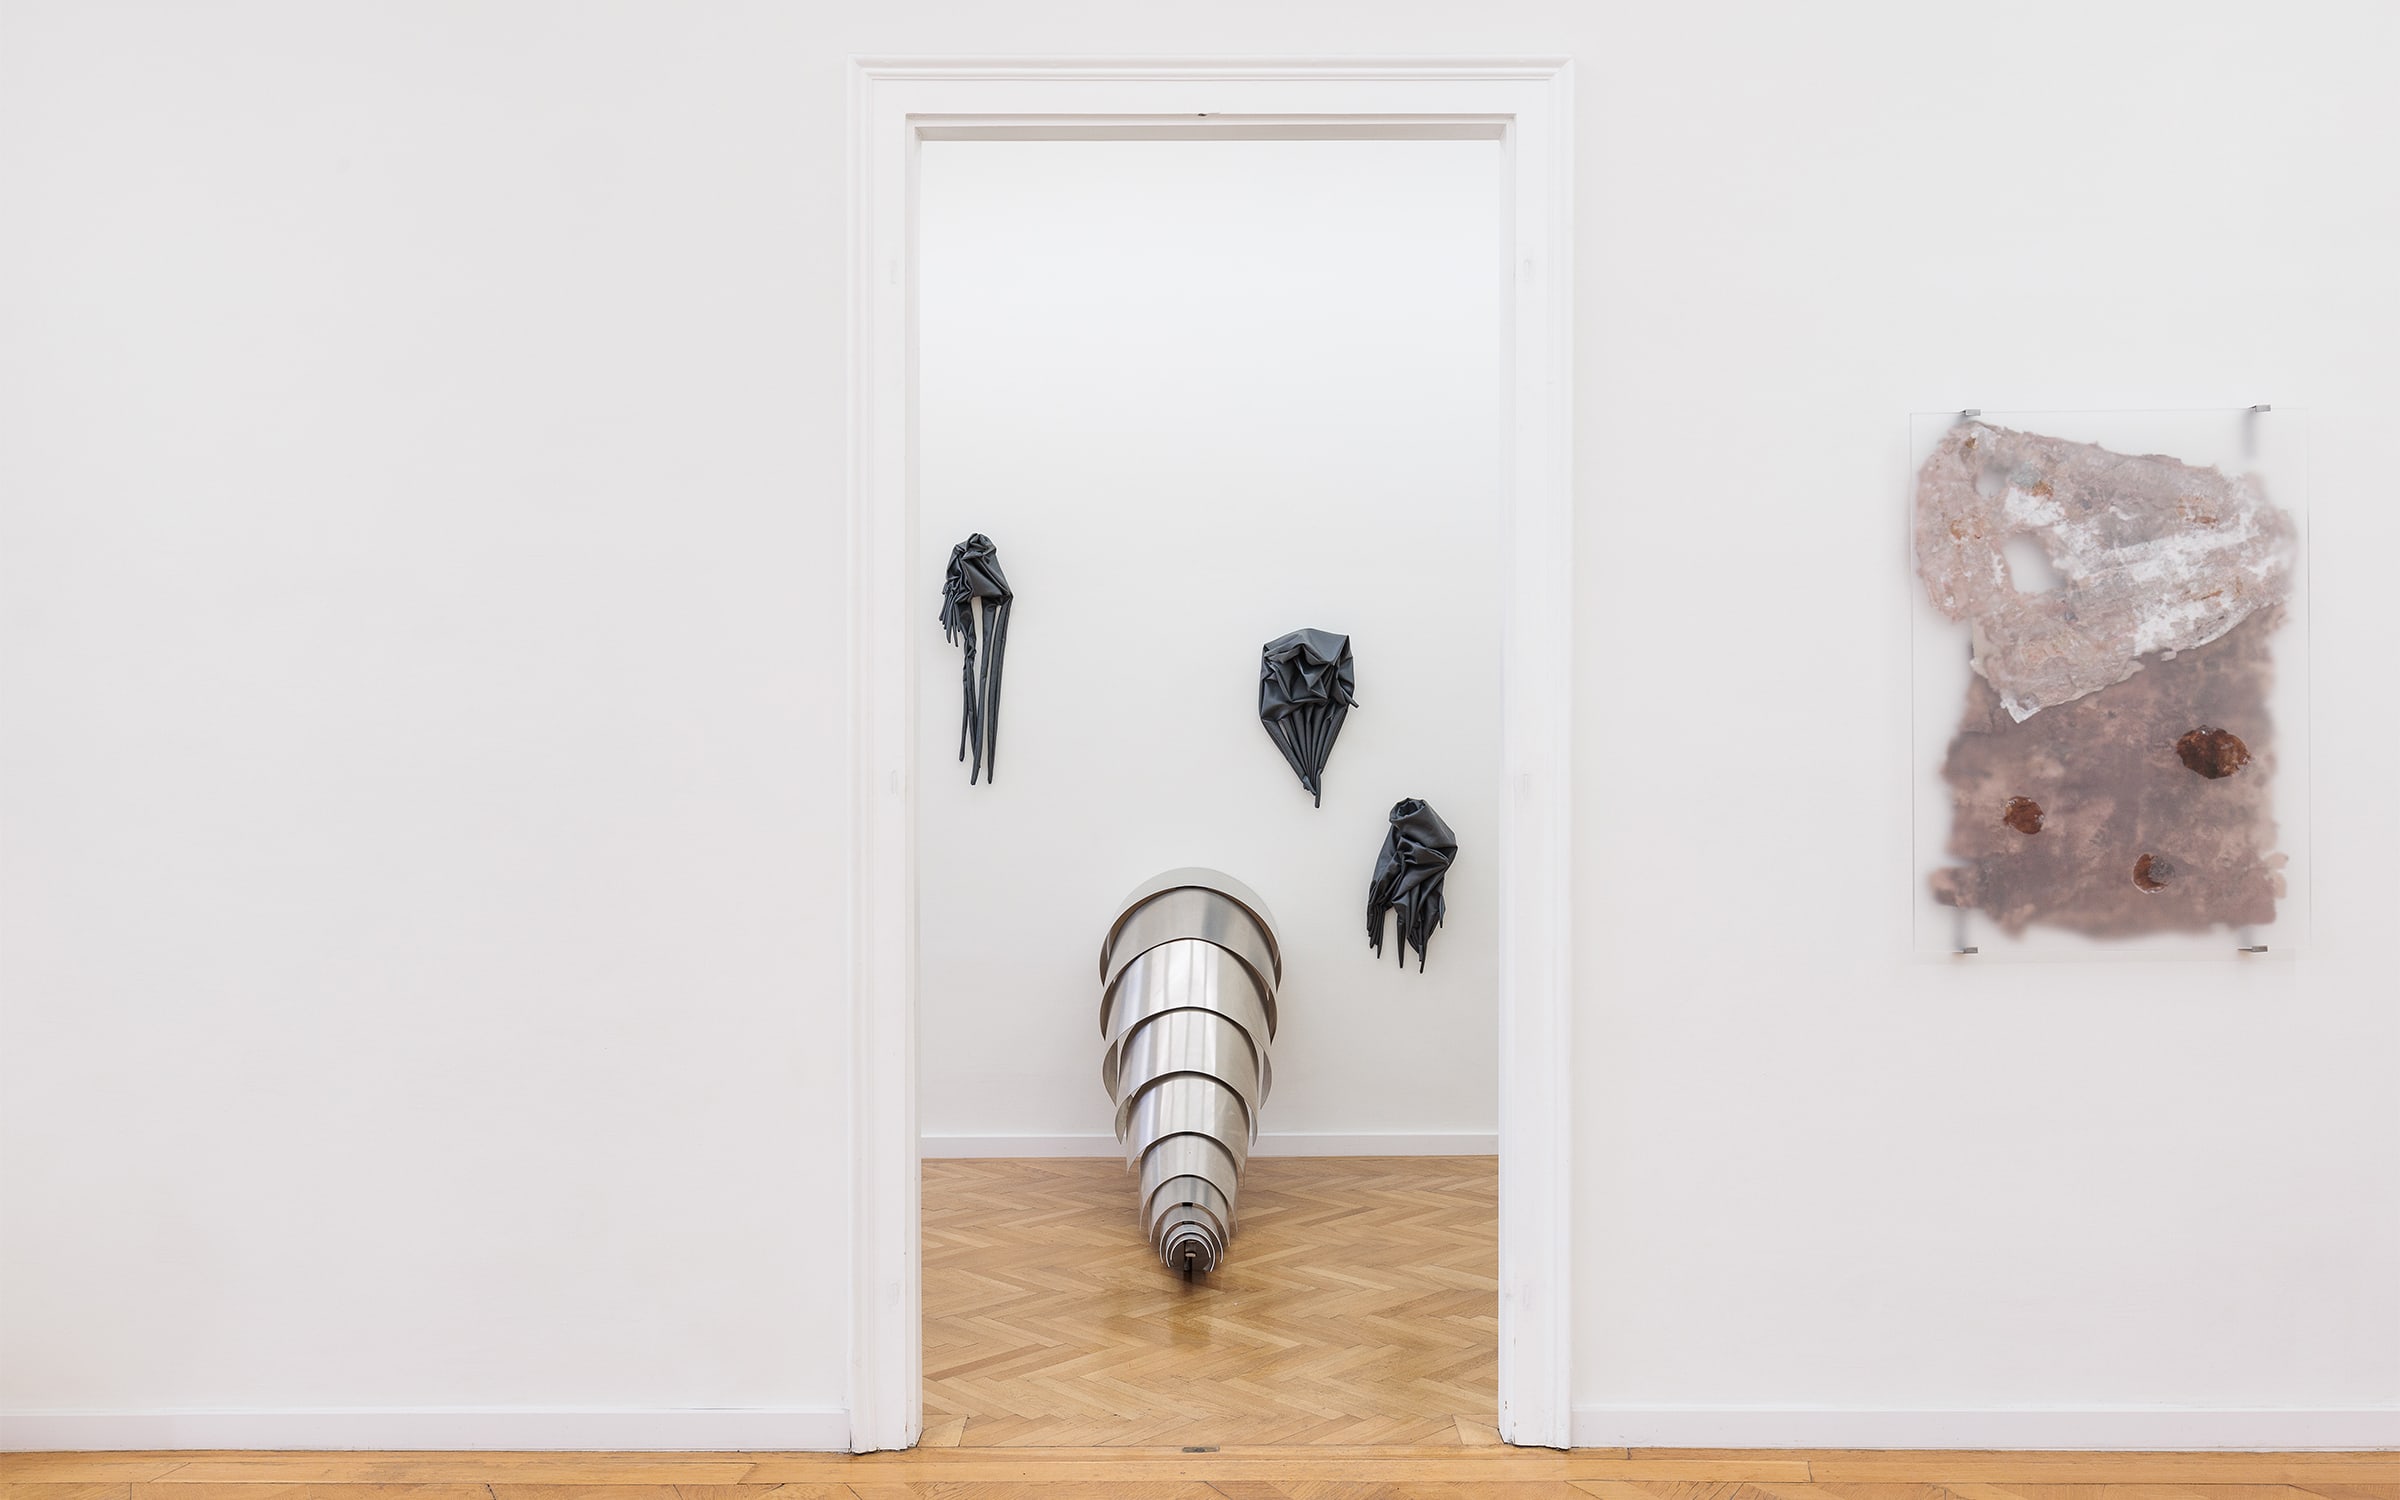 Installation view of Sandra Mujinga’s exhibition ‘Love Language’, Croy Nielsen, Vienna, 2023. Photograph by Kunst Dokumentation. Courtesy of the artist and Croy Nielsen.